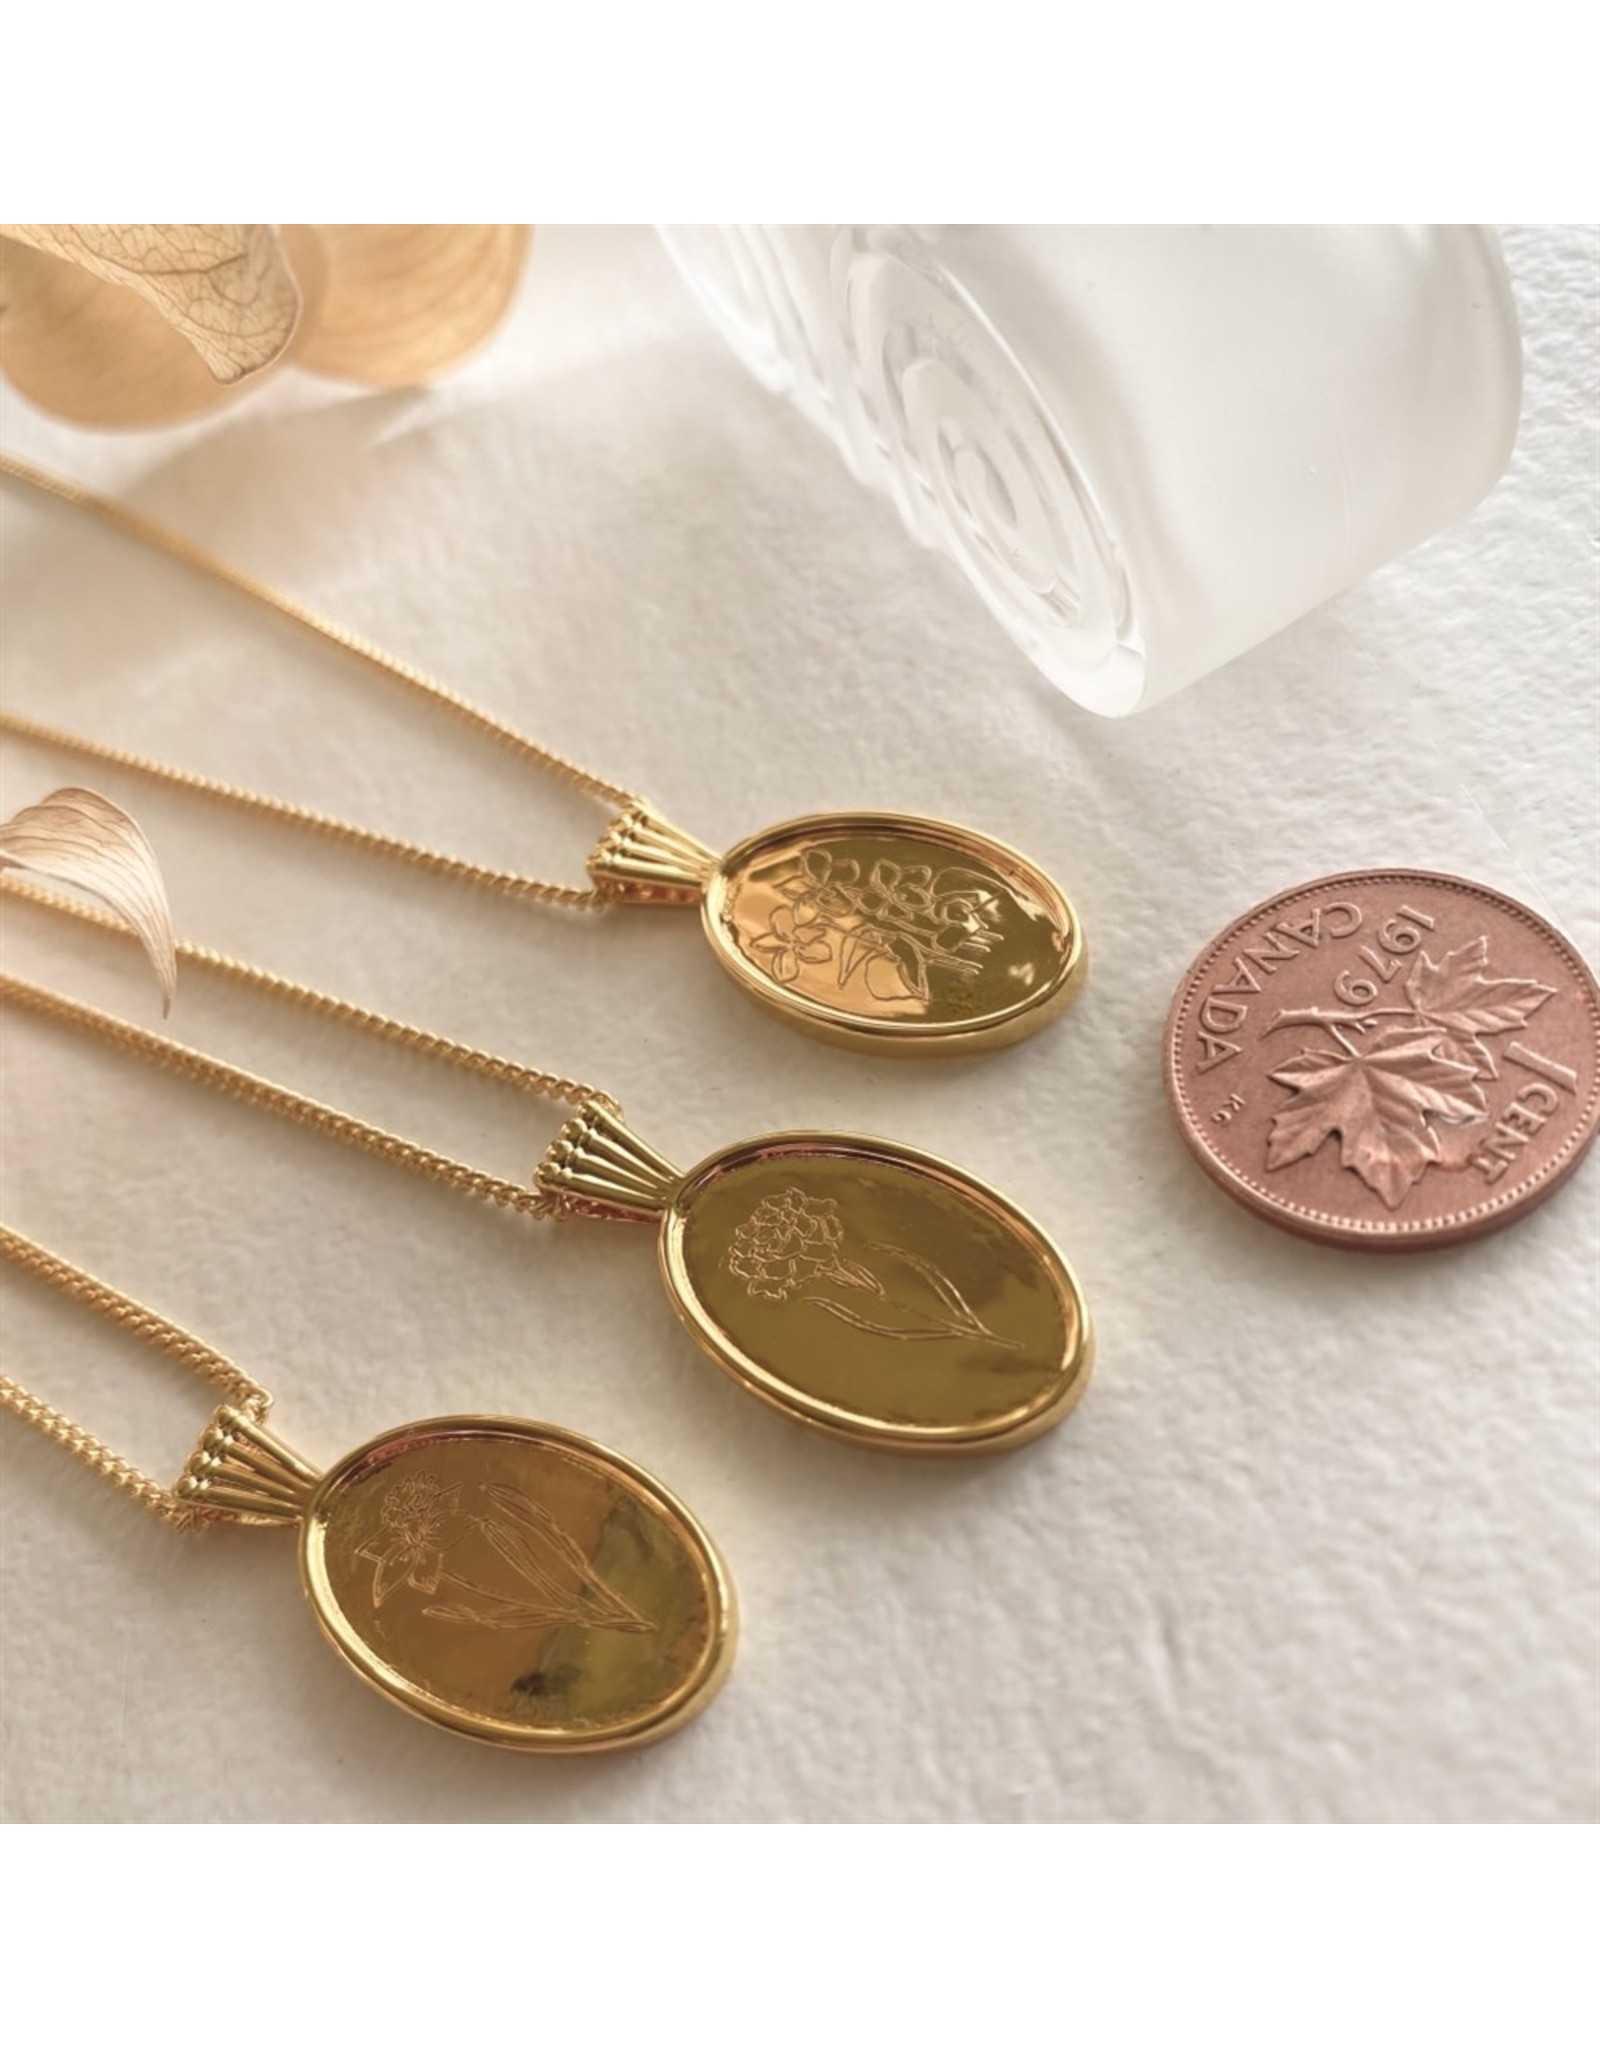 Pika & Bear Pika & Bear - Le Clos Normand Birth/Wildflower Pendant Necklace Collection - September/Aster